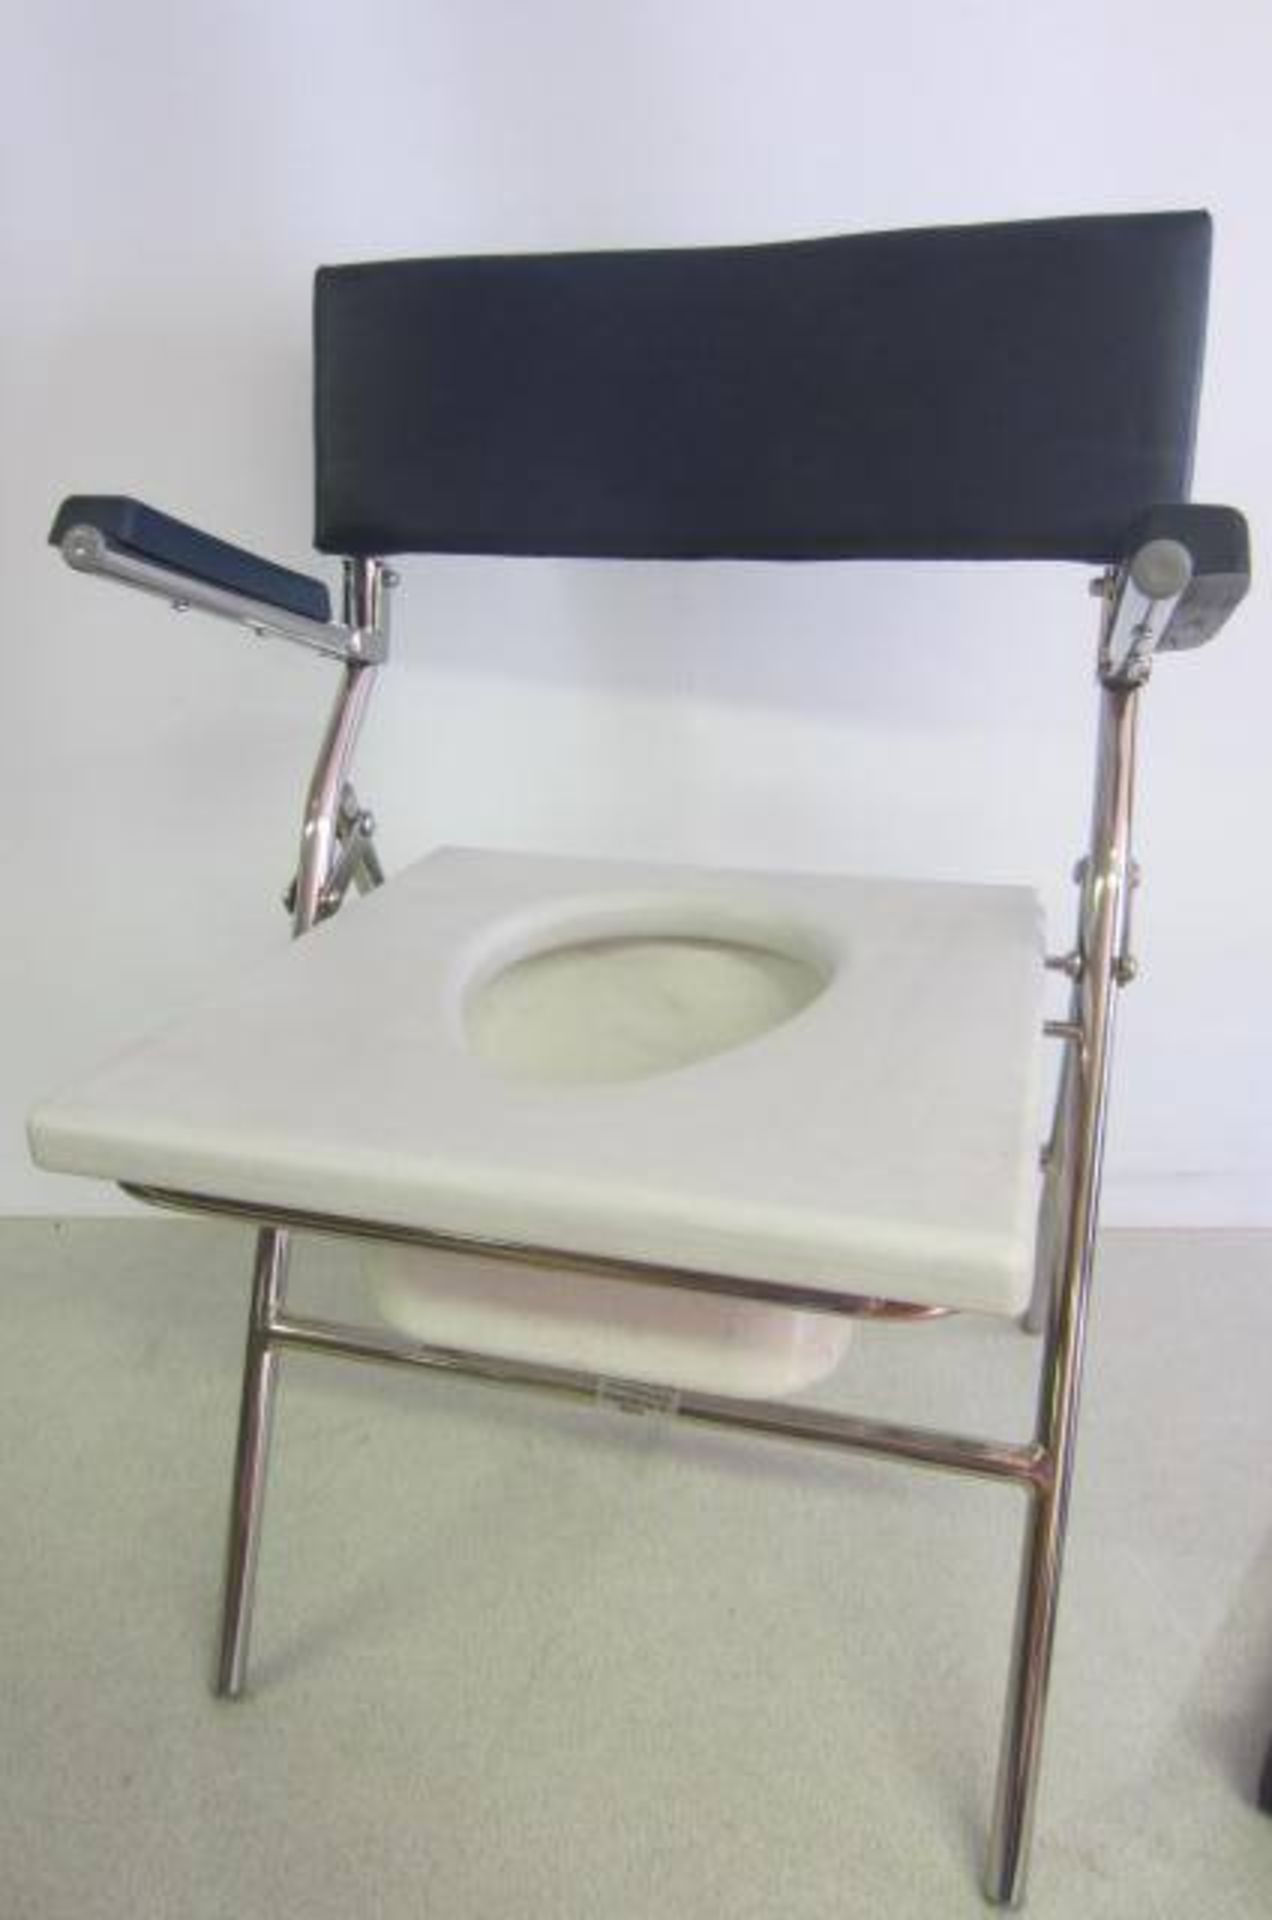 Days Patterson Medical Mobile Commode Chair, Model 512DBAPH. DOM 2014. In Box As New. - Image 2 of 3